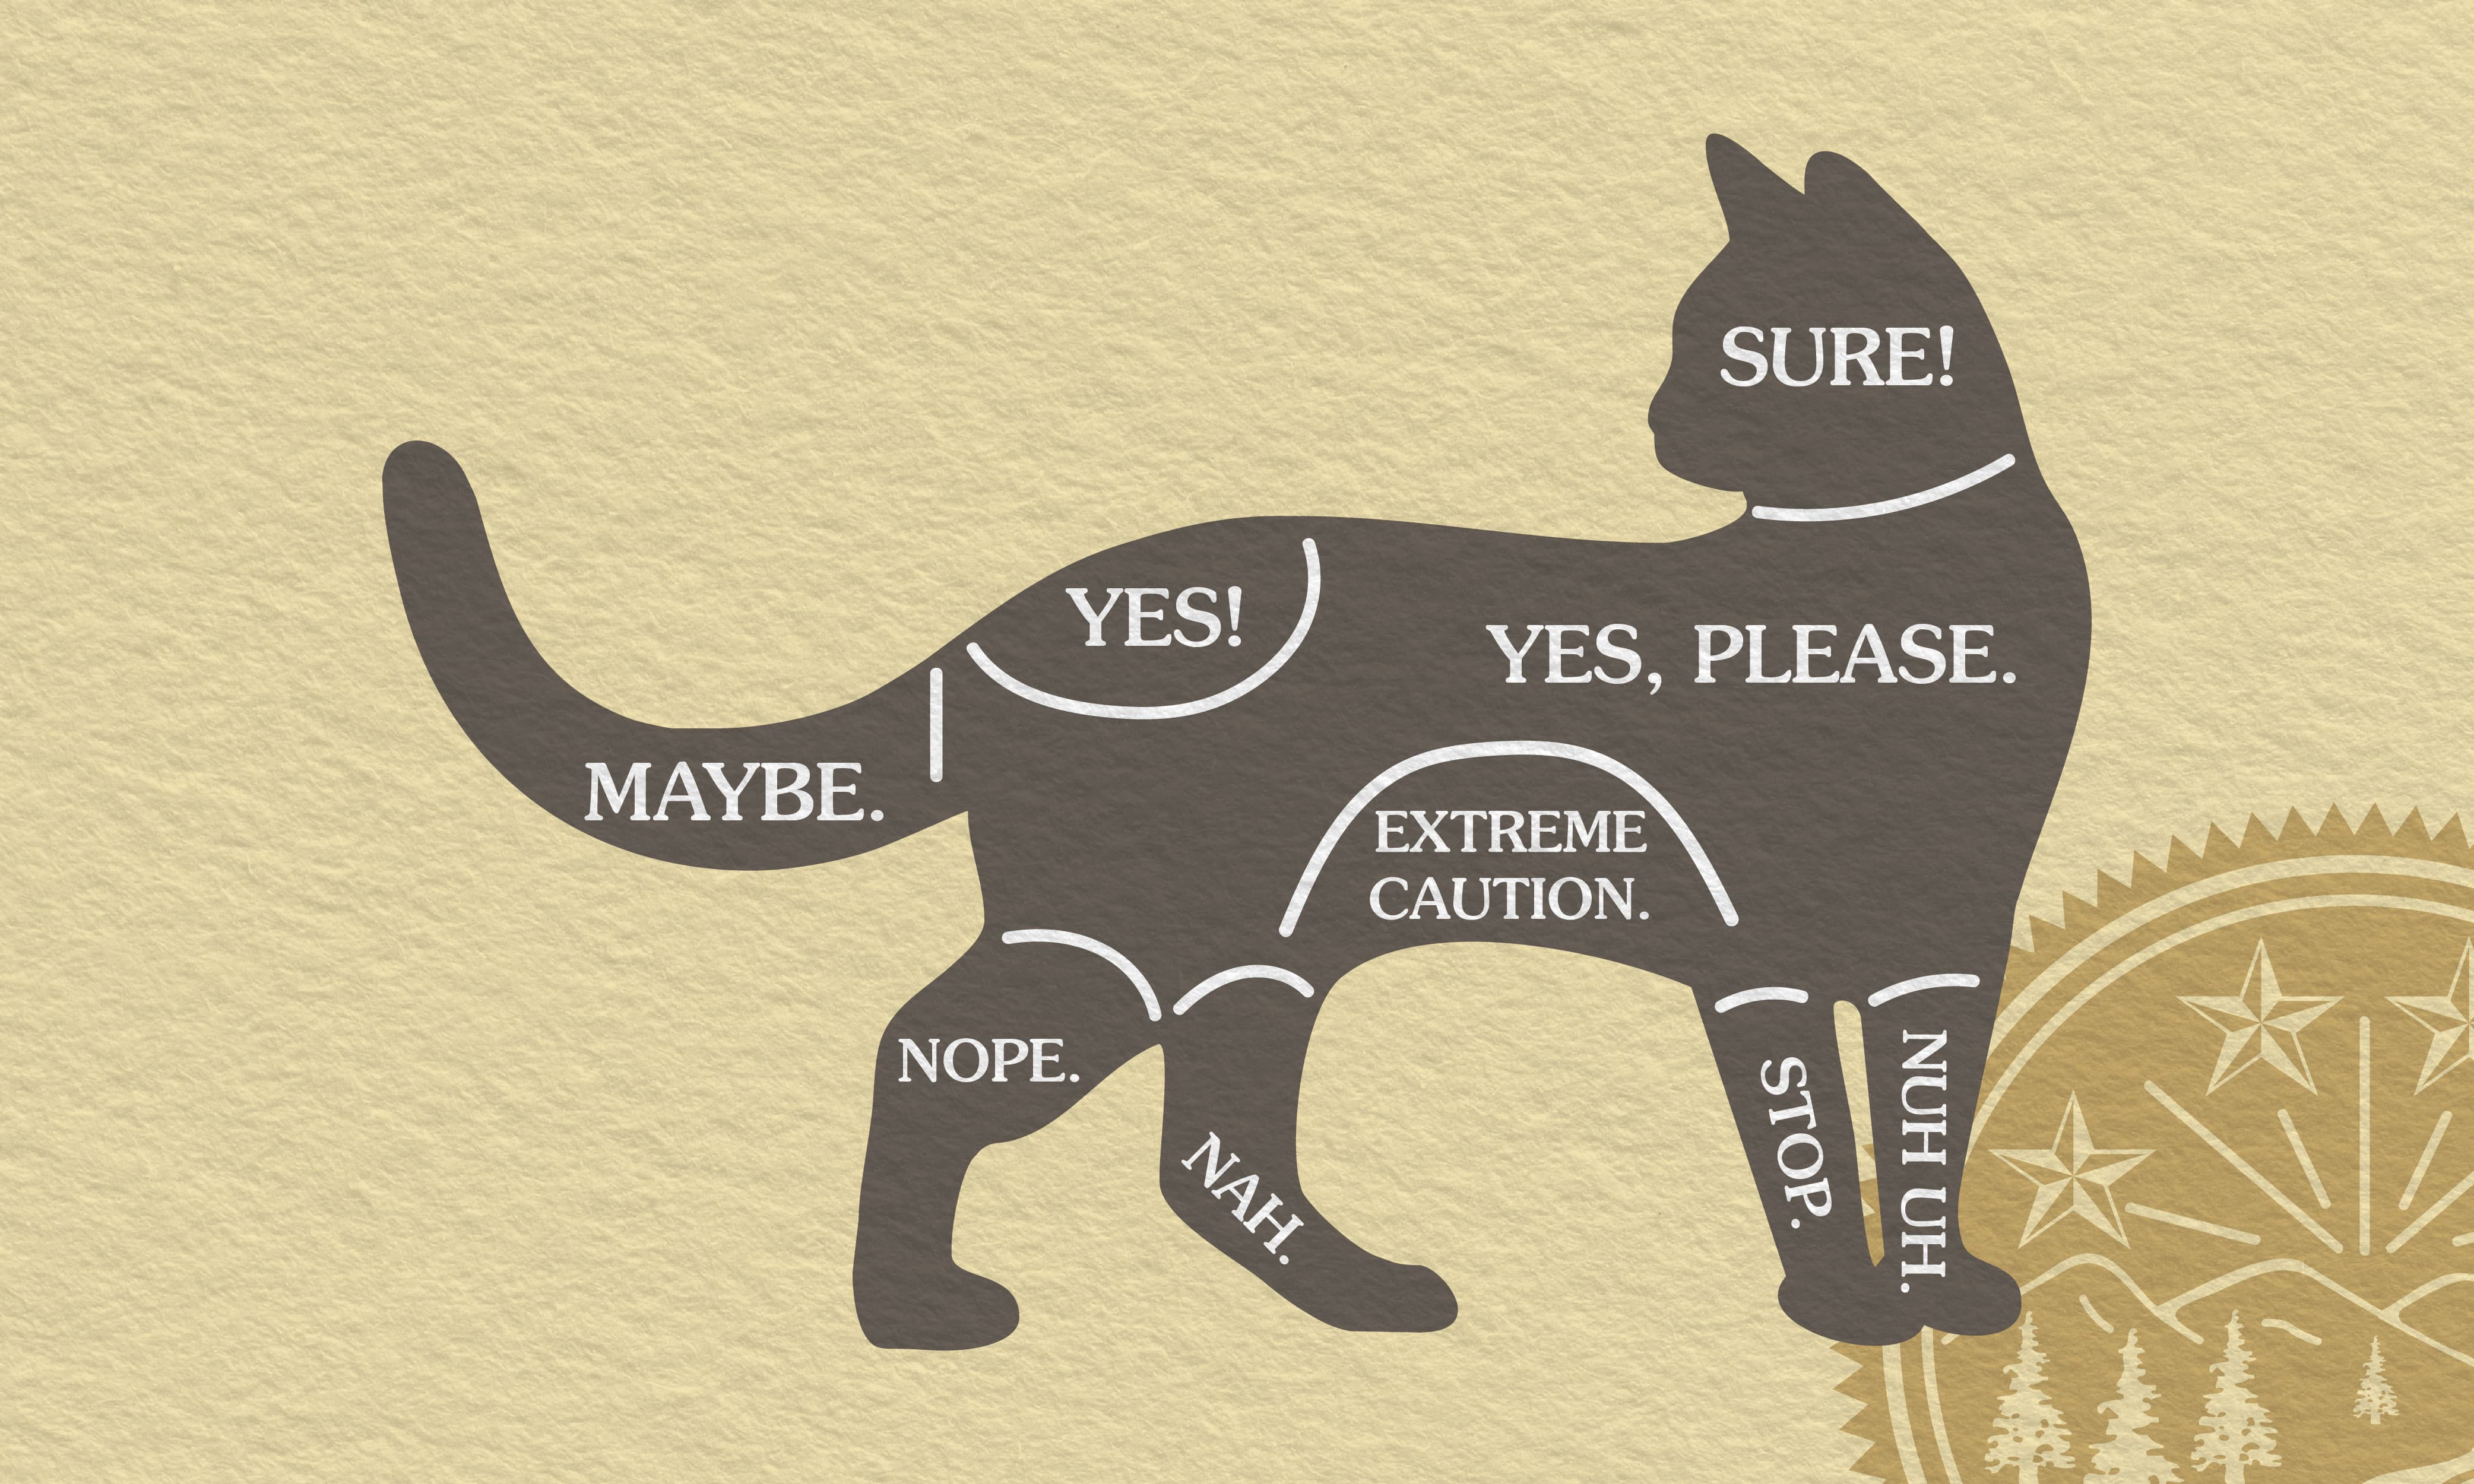 An infographic detailing which spots on a cat are okay to pet and which spots are not okay.